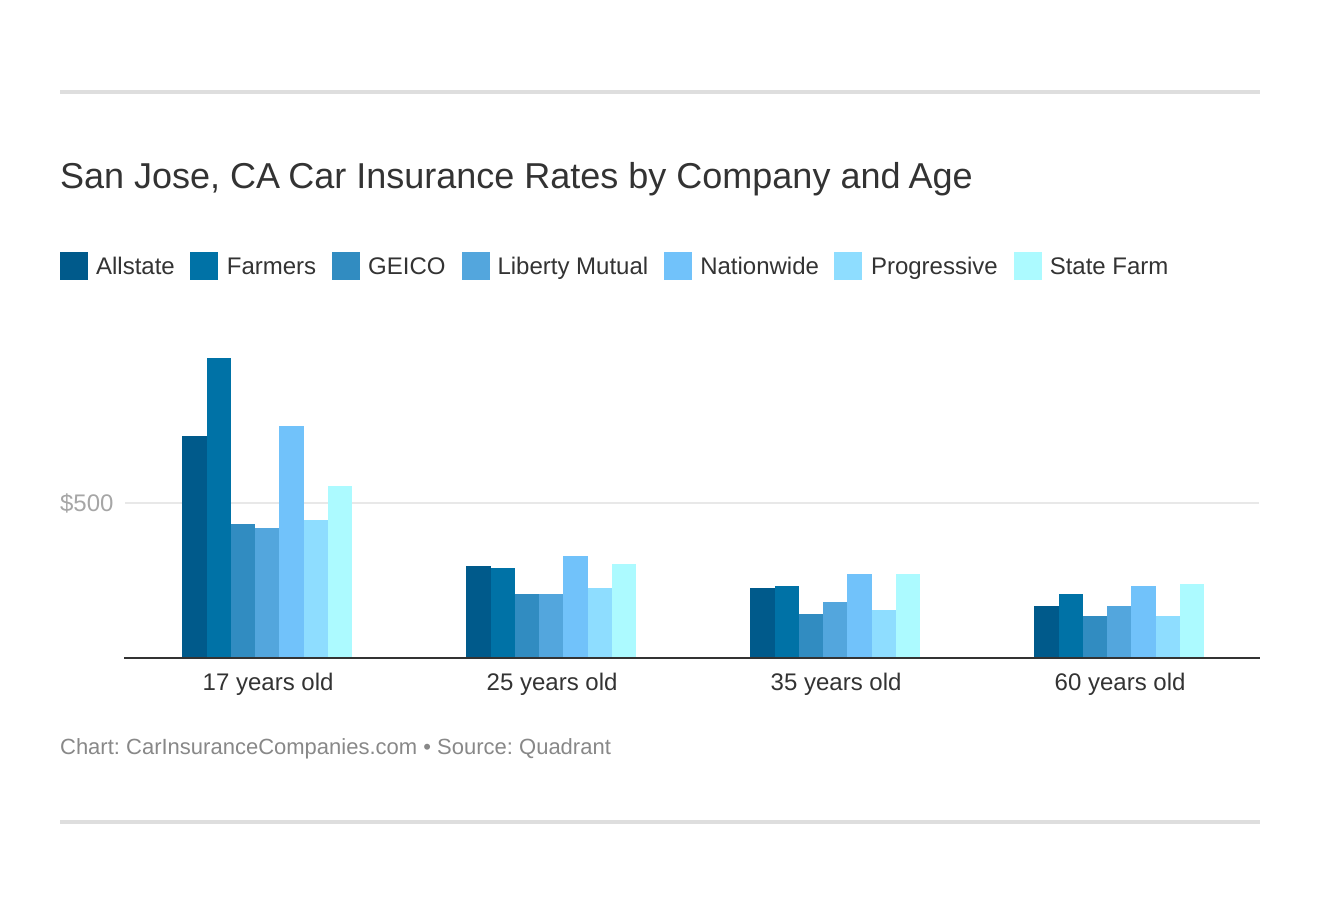 San Jose, CA Car Insurance Rates by Company and Age